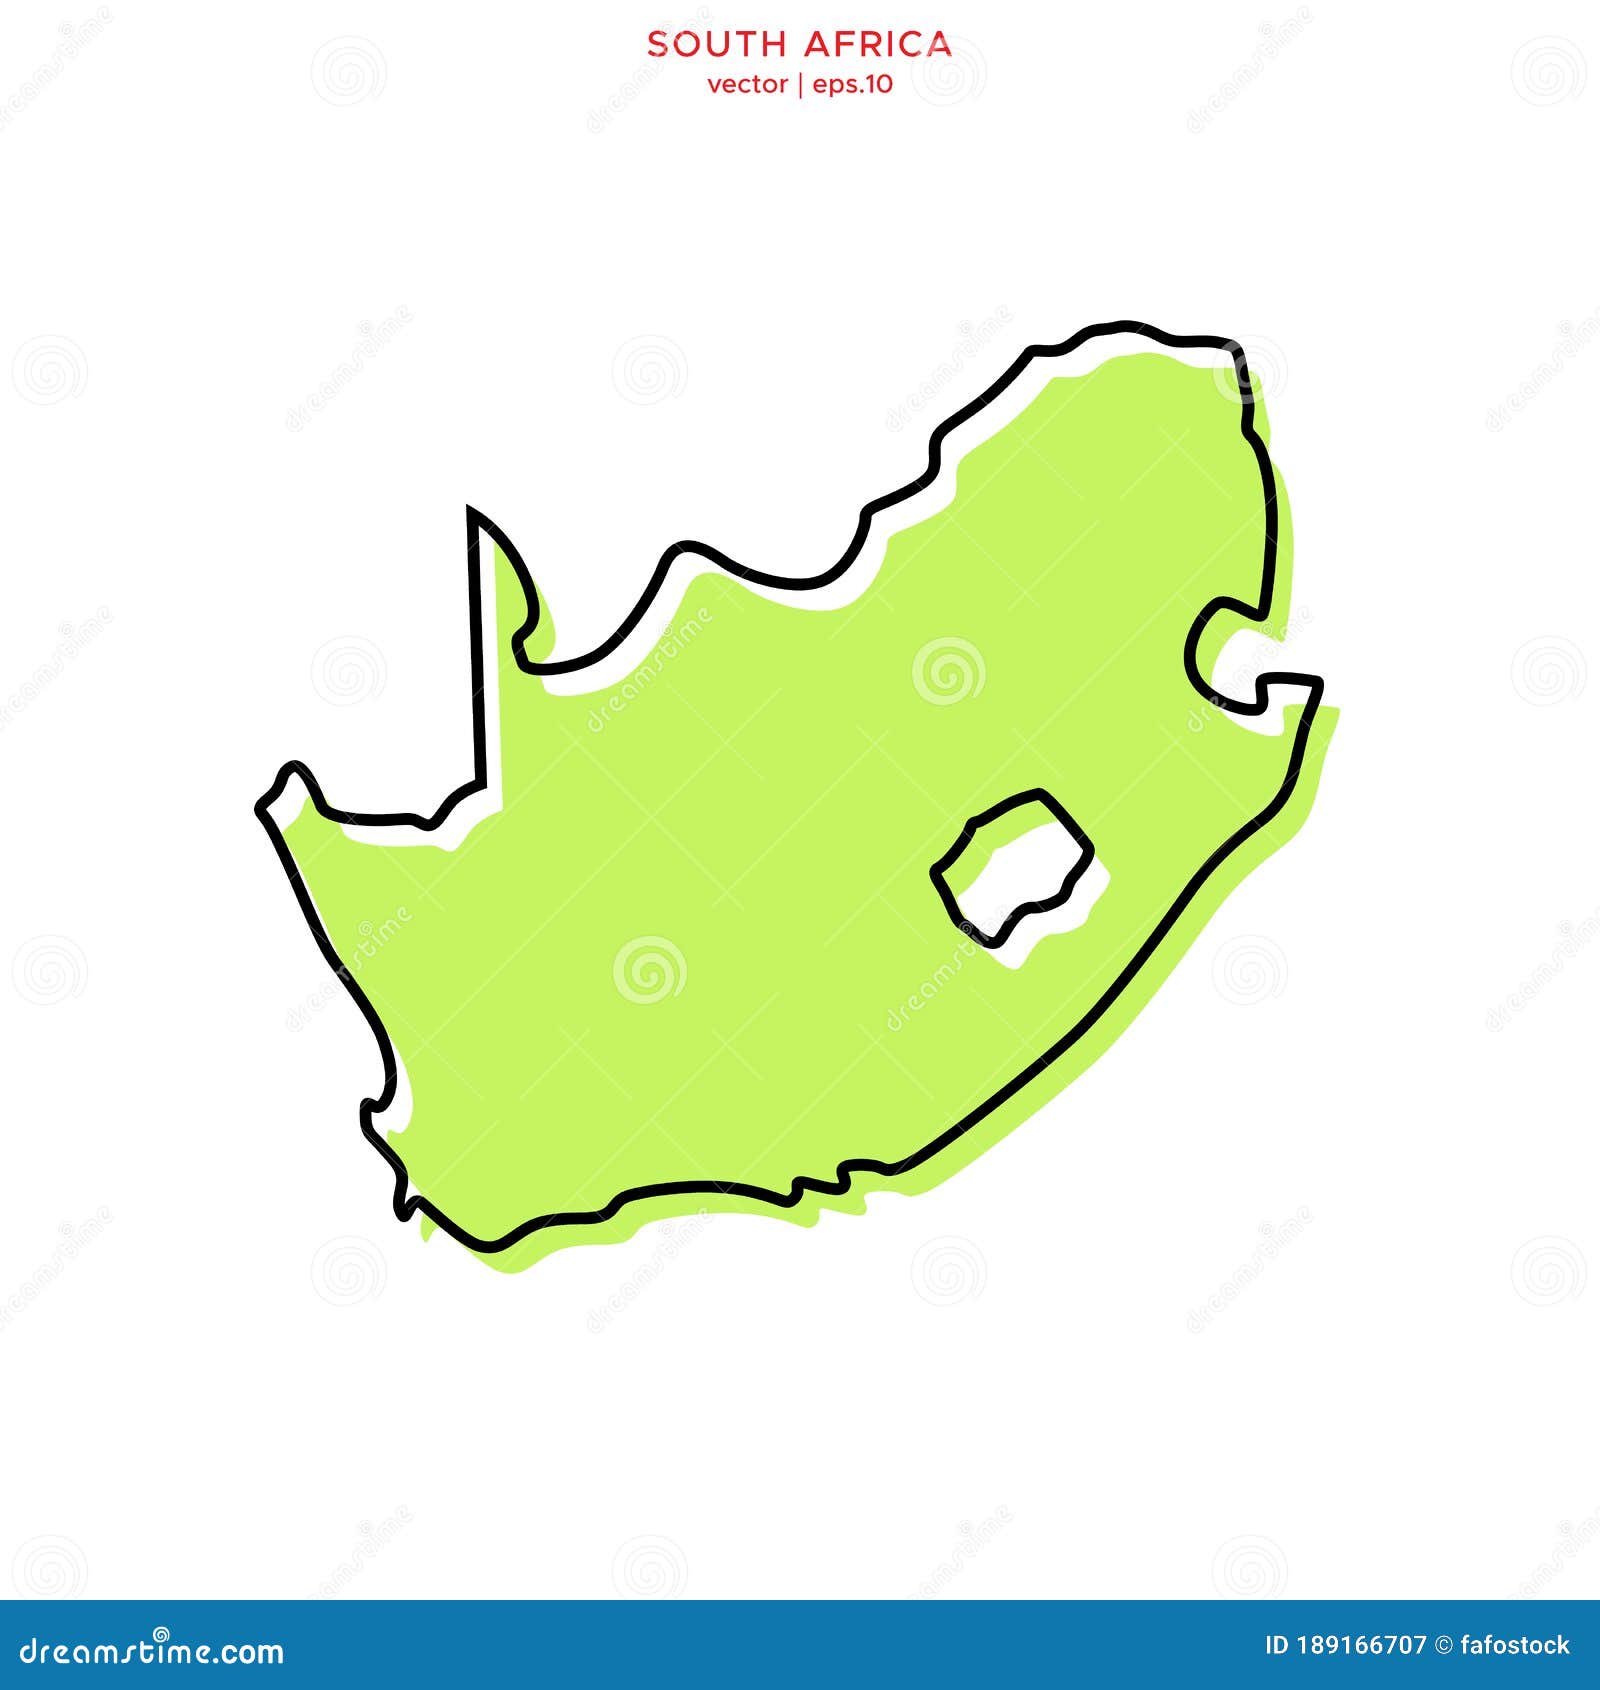 green-map-of-south-africa-with-outline-vector-design-template-editable